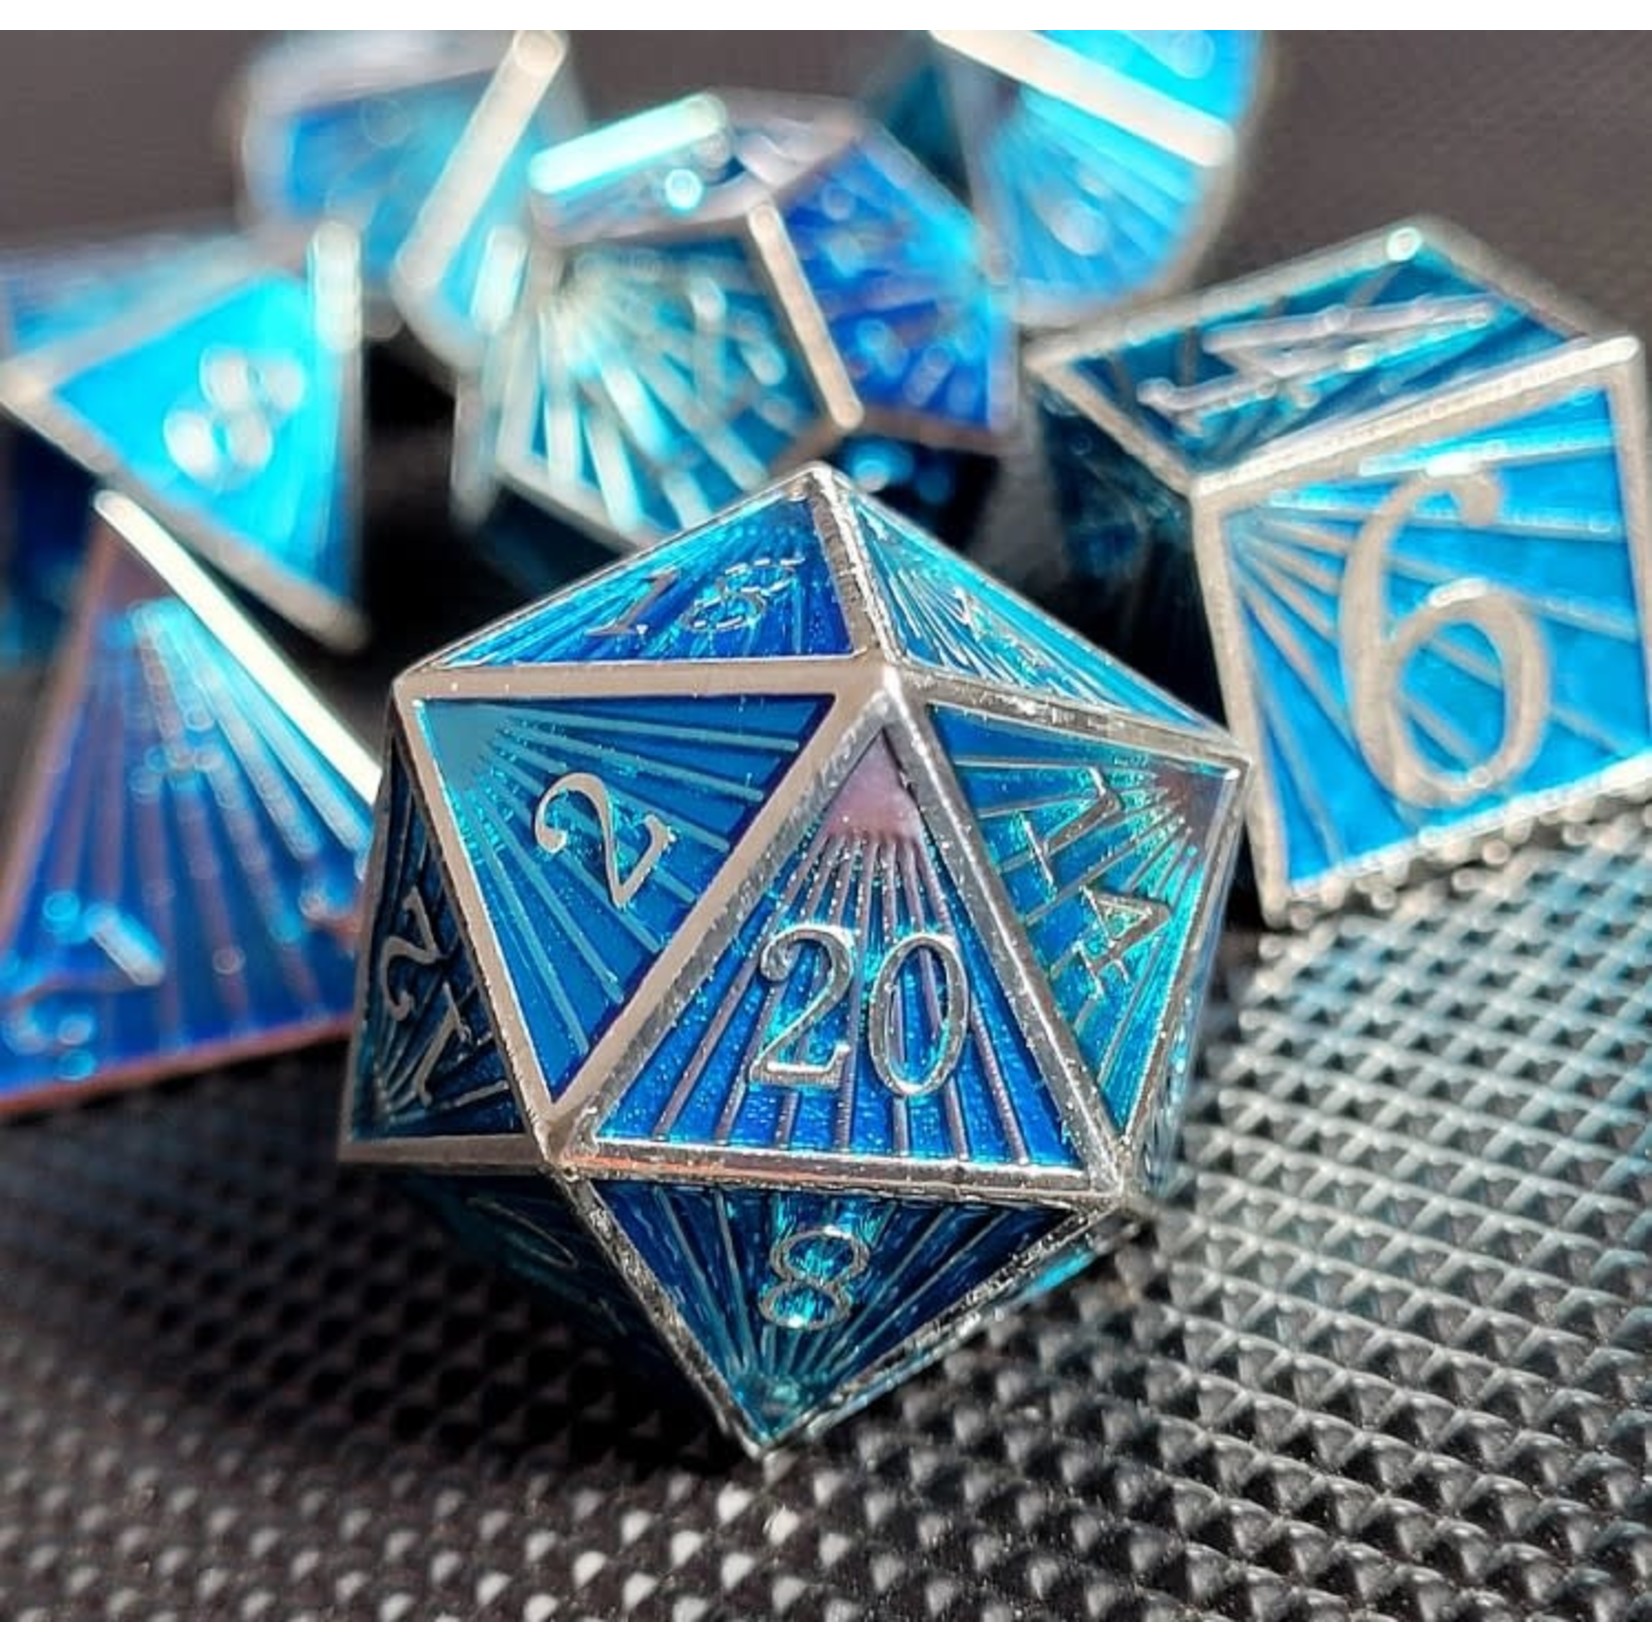 Forged Gaming Set of 7 Metal Dice: Deco Ice